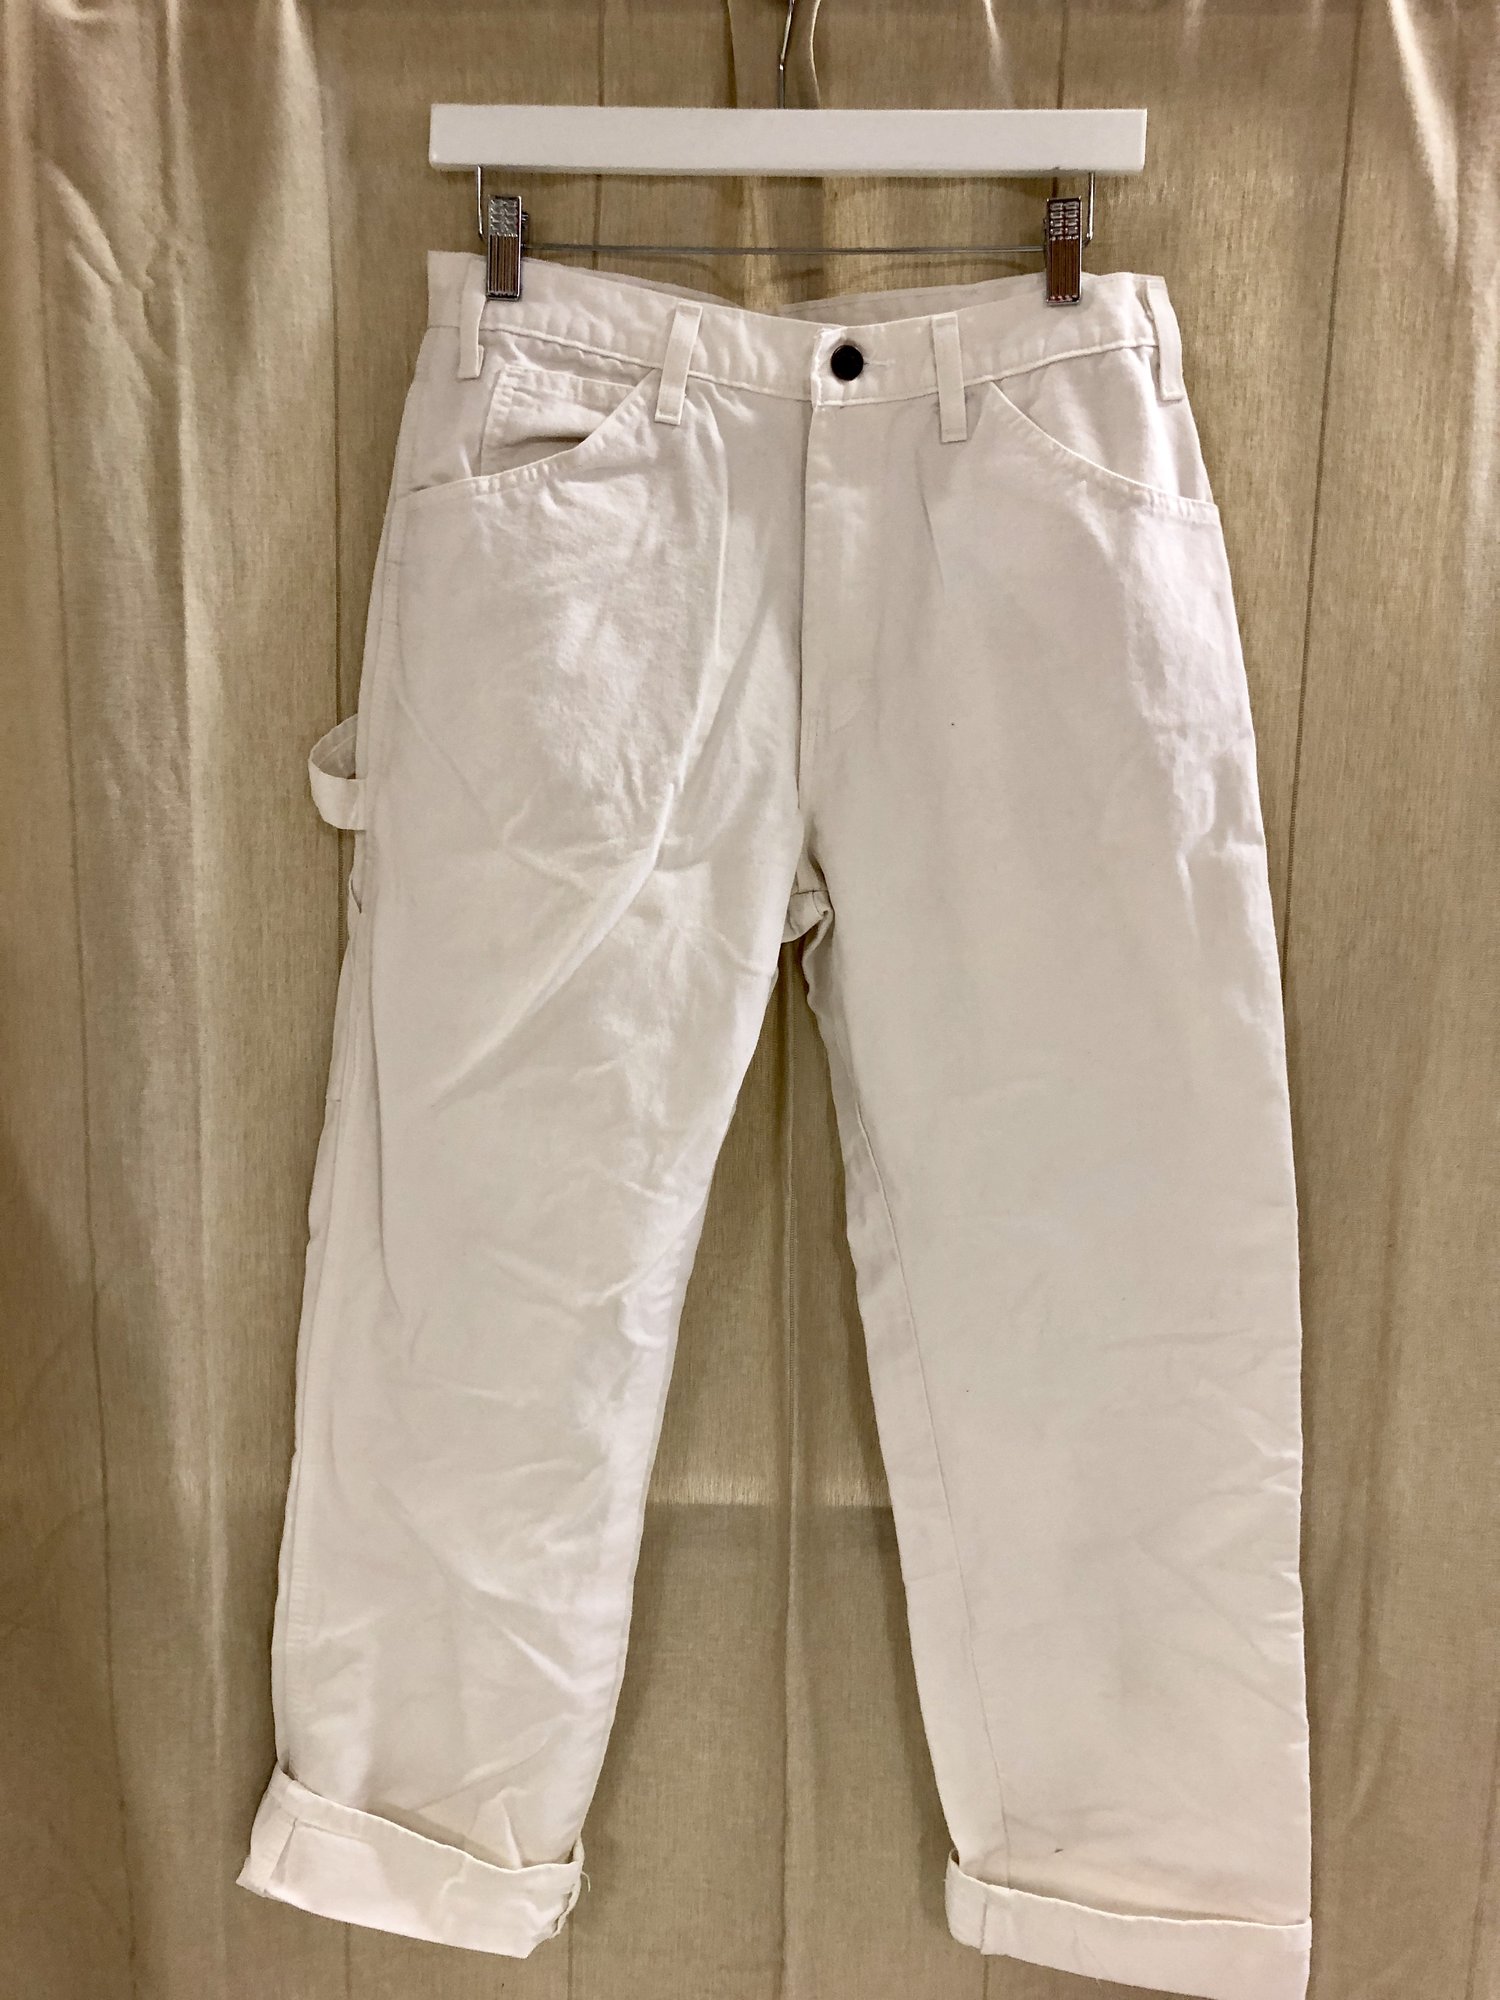 MONARCH WHITE DICKIES CARPENTERS - Stitched Up